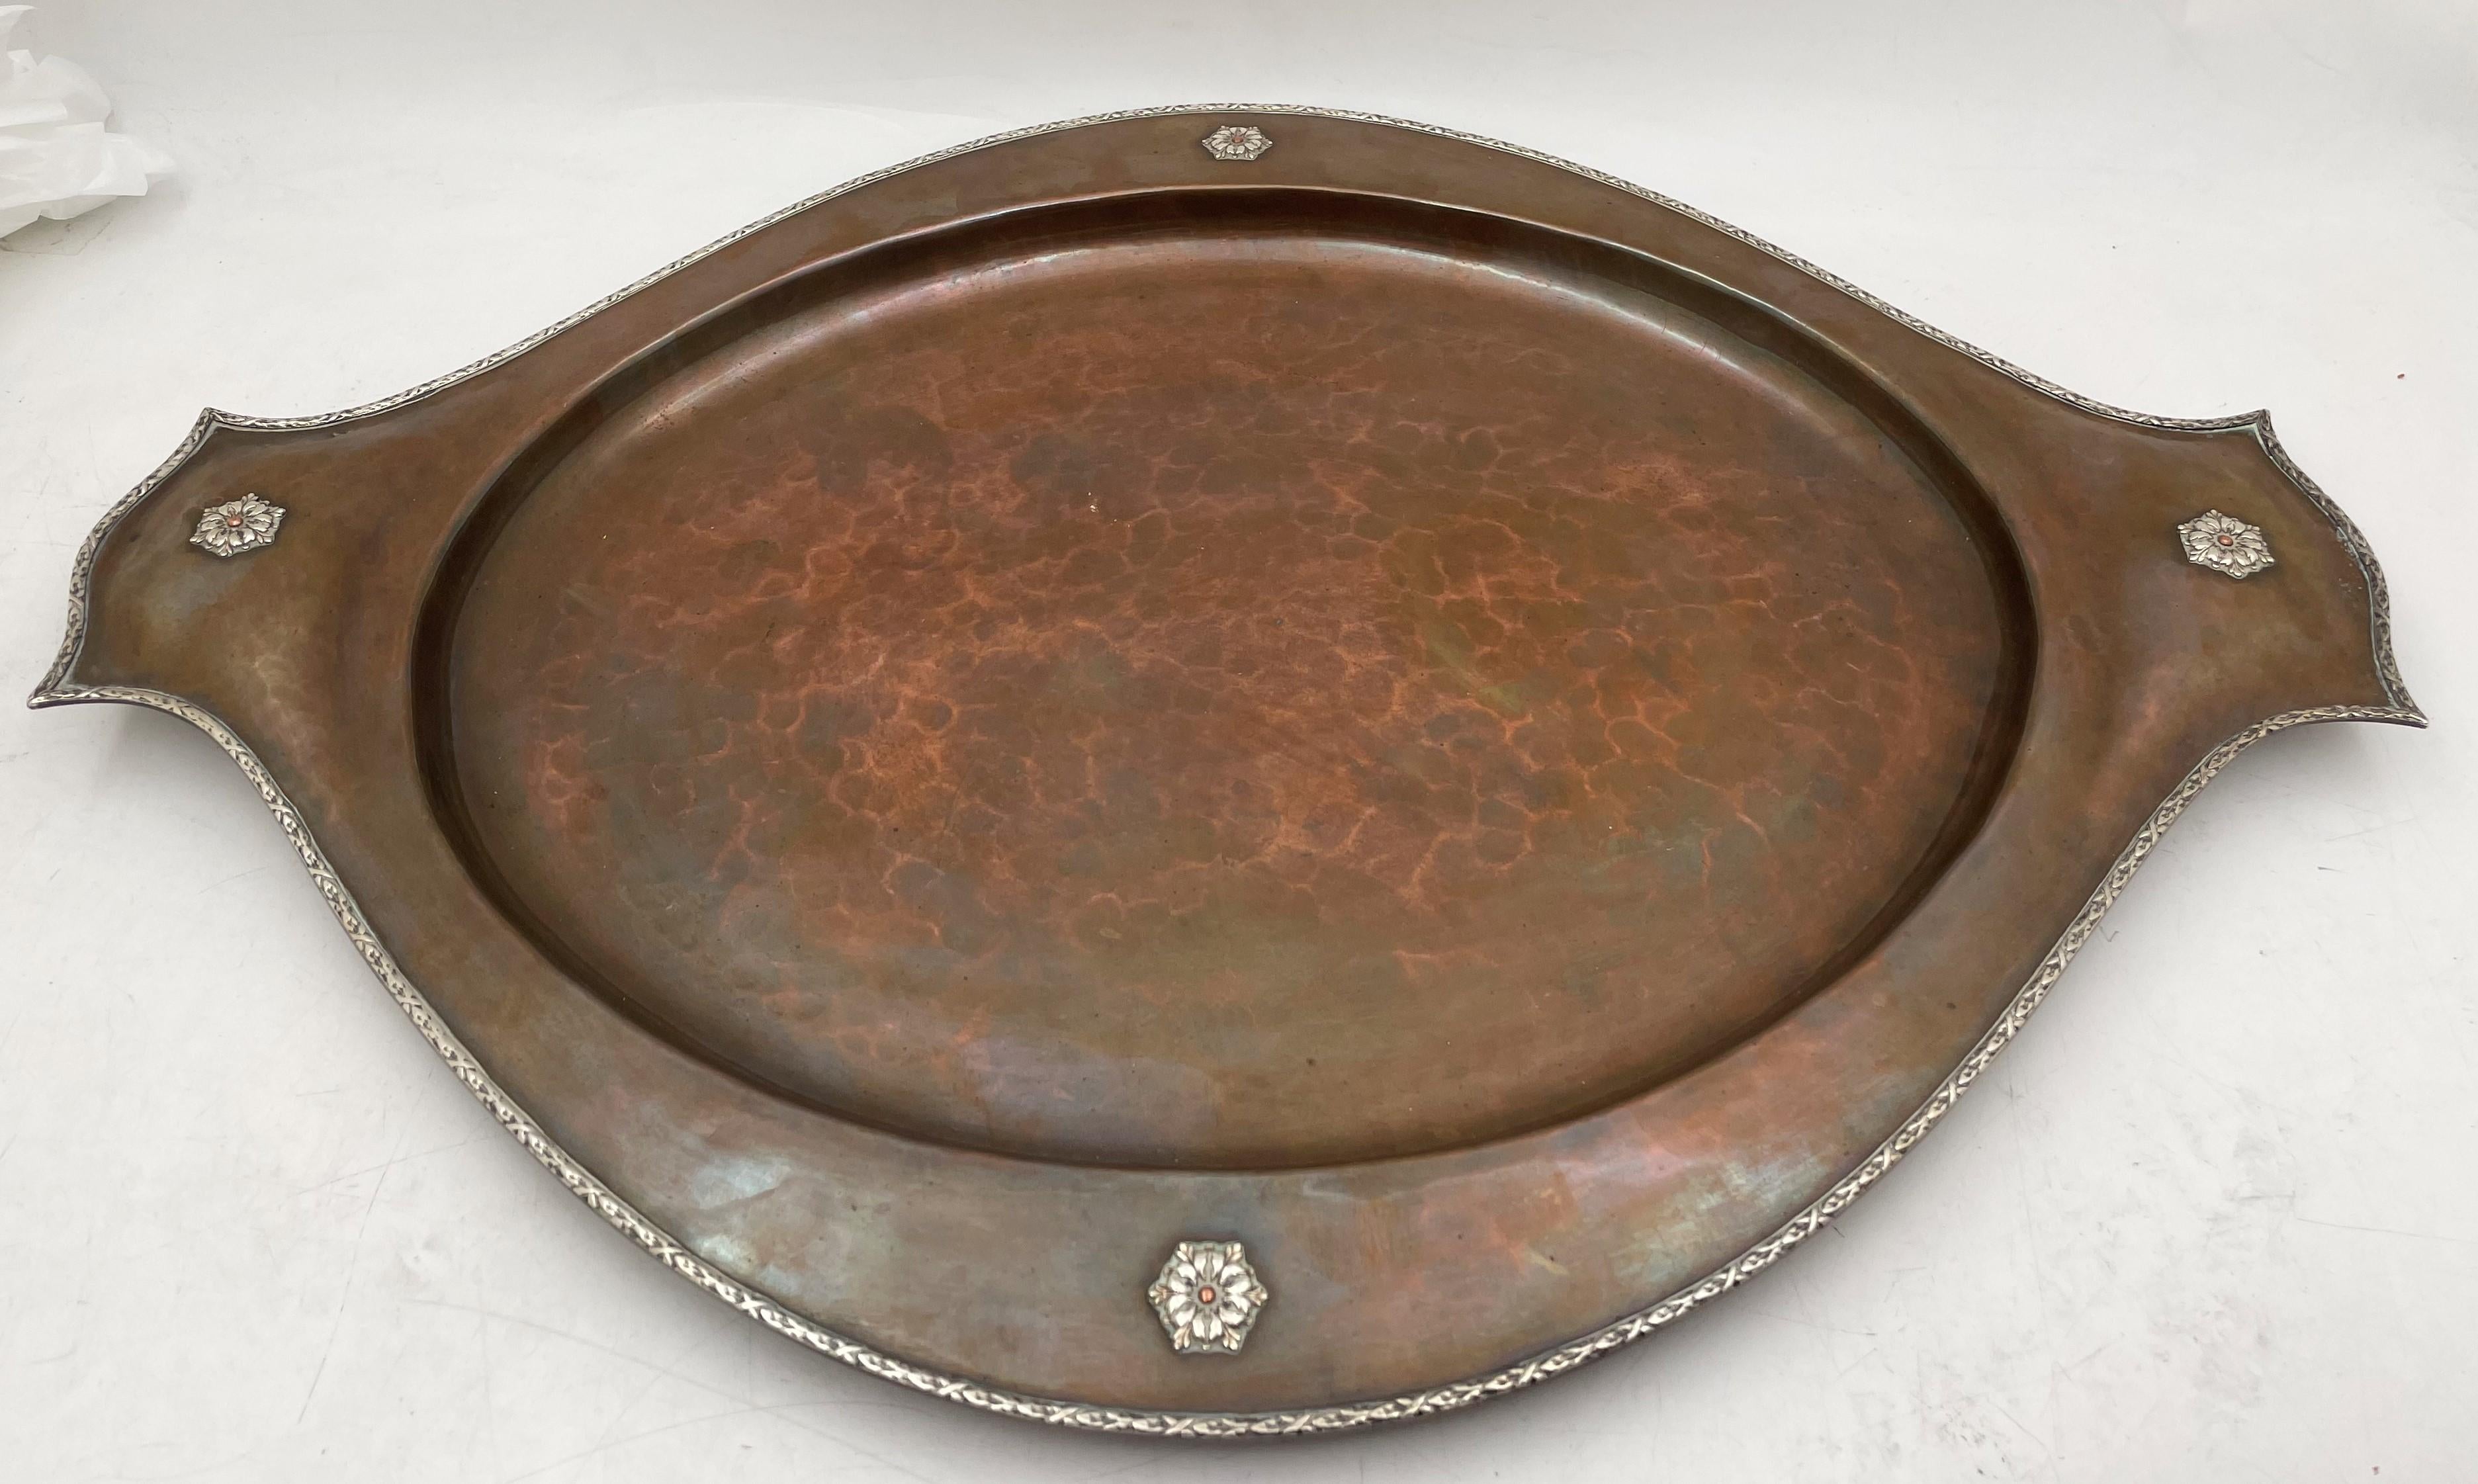 A. E. Jones copper pair of vases and tray in Arts & Crafts style, adorned with applied sterling silver motifs, from the early 20th century. The vases measure 7 3/4'' in height by 3 1/2'' in diameter at the top. The tray measures 20 1/2'' in length